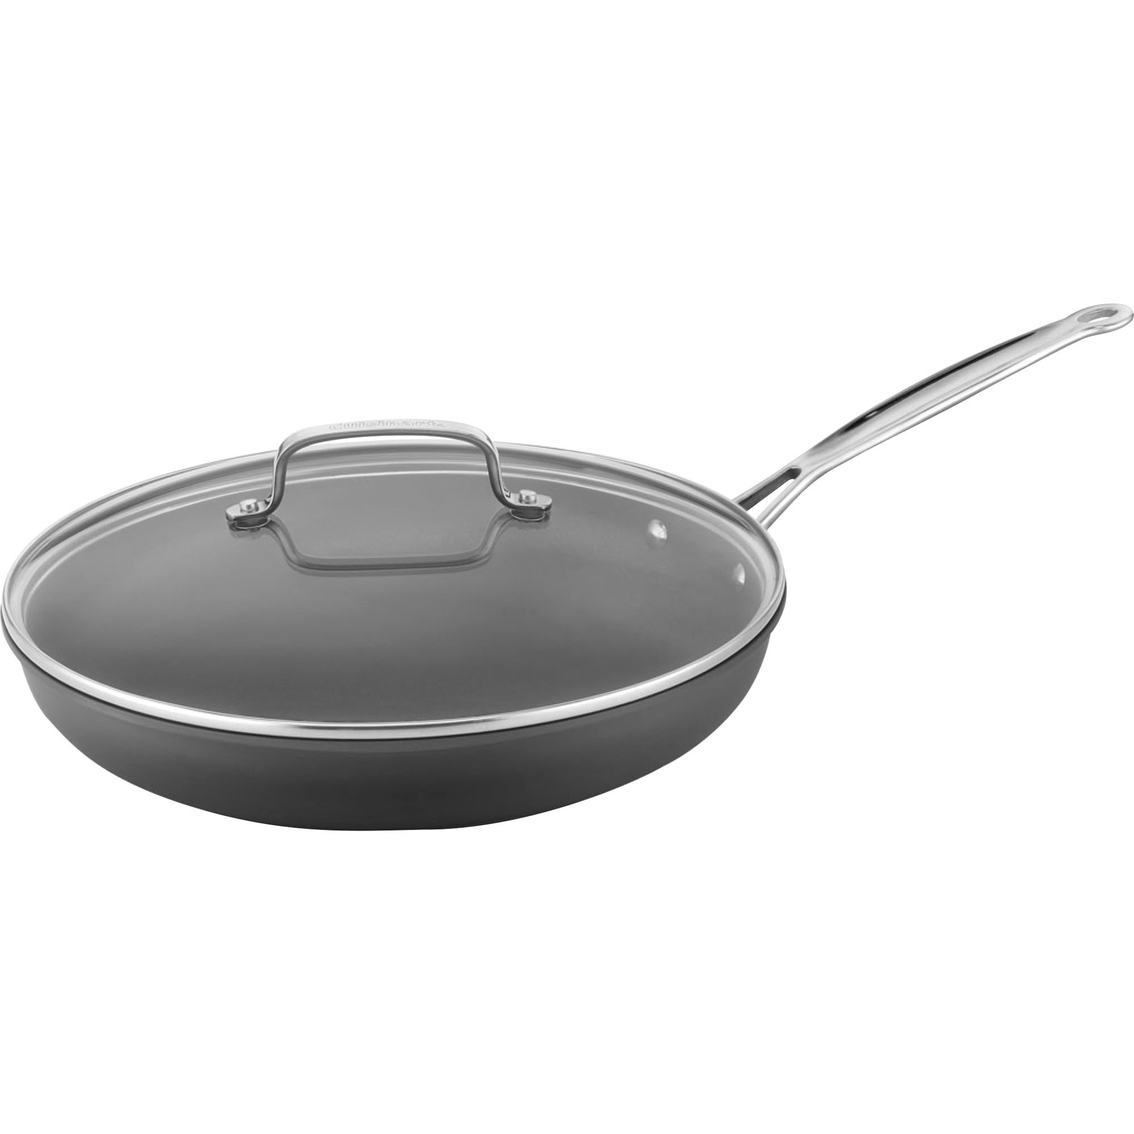 Cuisinart Chef's Classic Nonstick Hard Anodized 12 in. Skillet with Cover